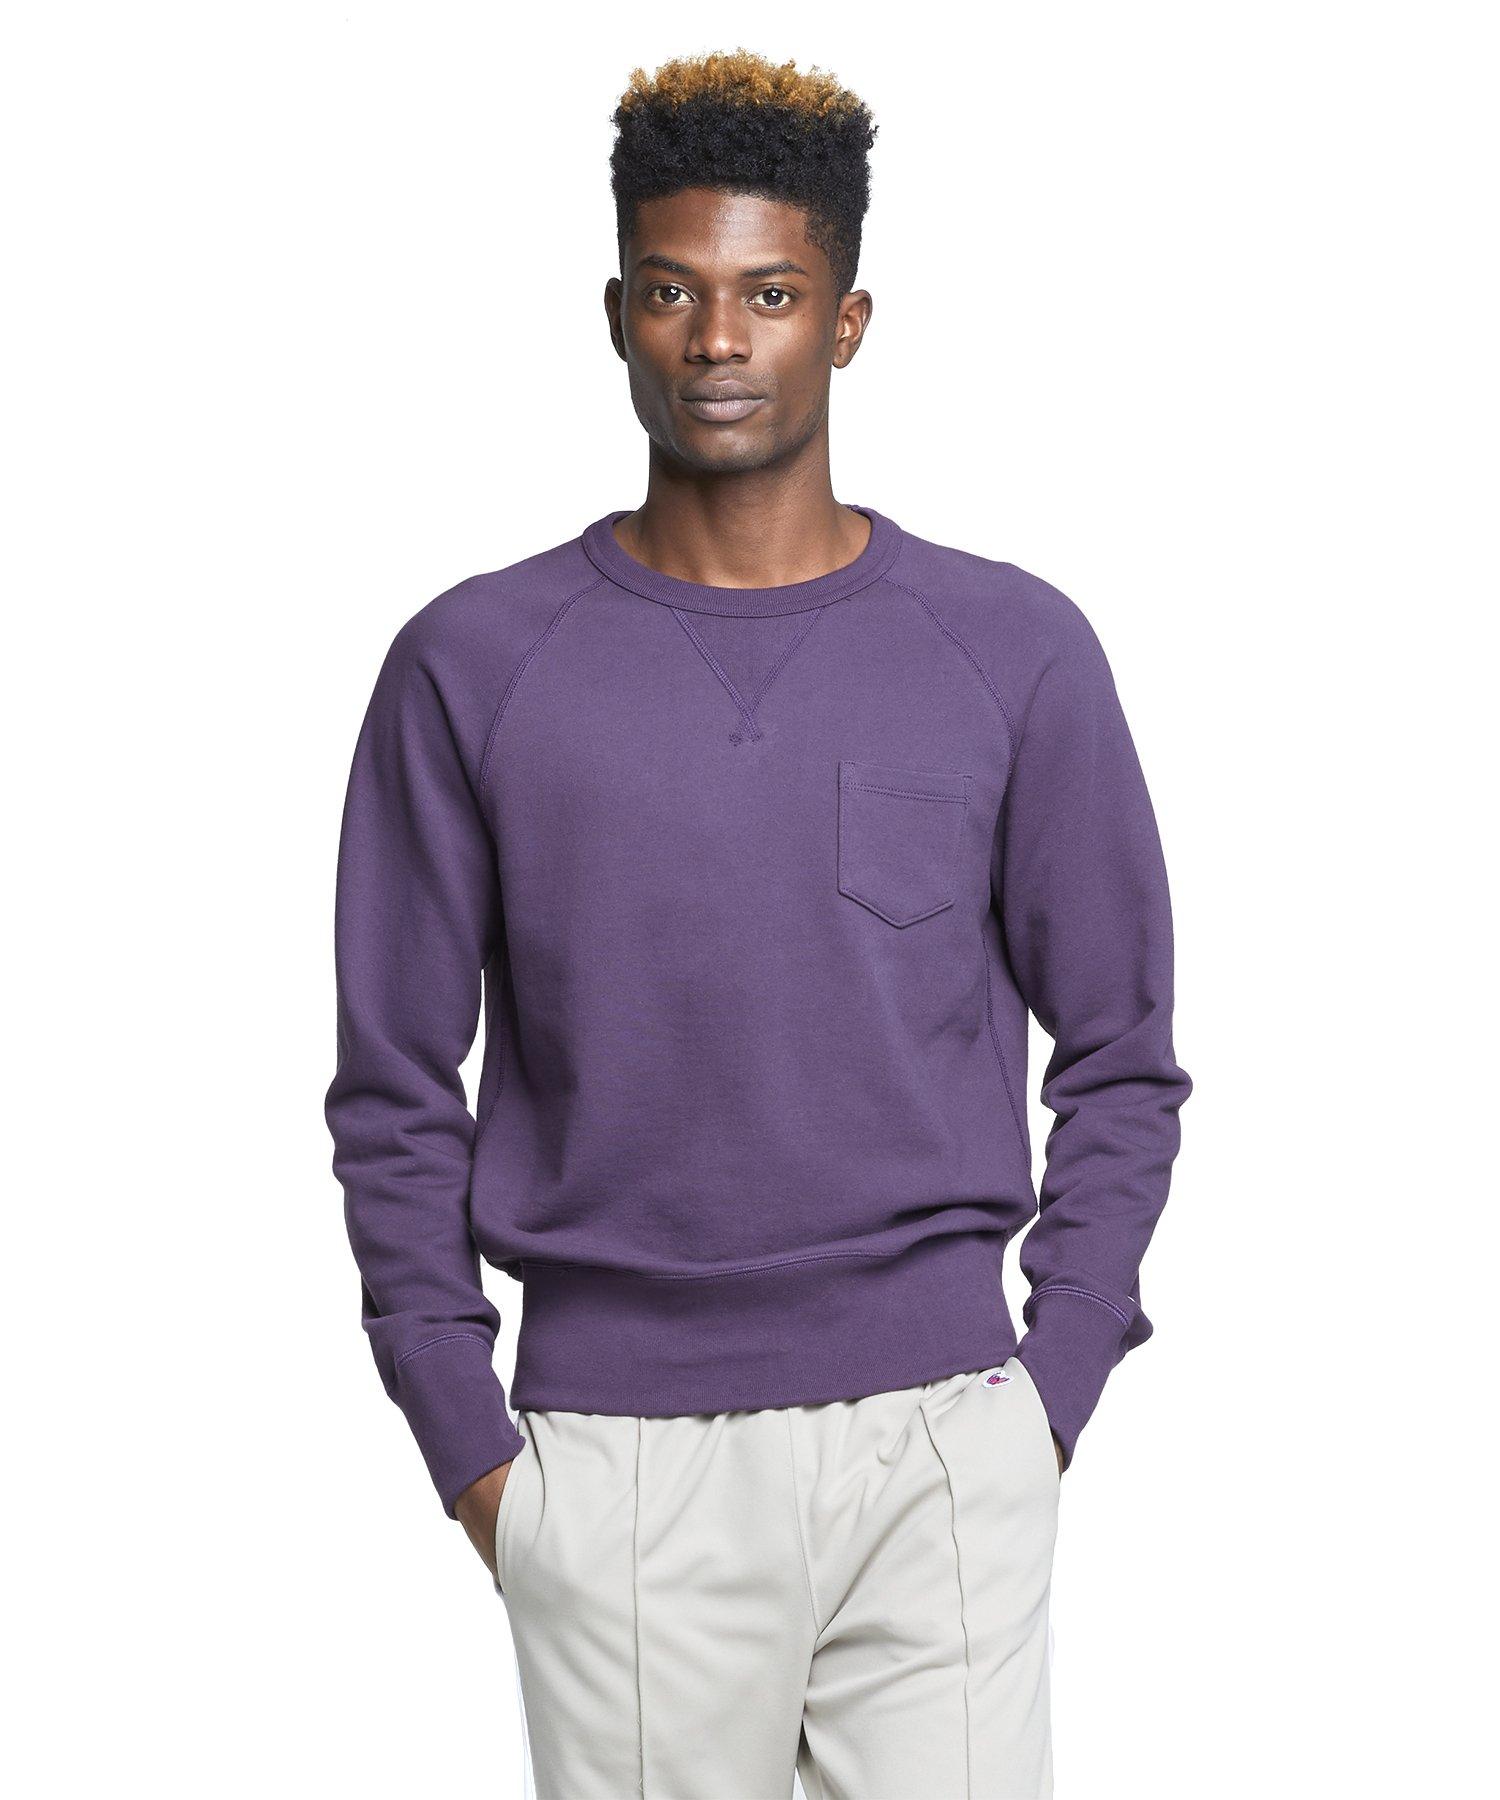 Todd Snyder Cotton Terry Pocket Sweatshirt In Plum Royale in Purple for Men  - Lyst